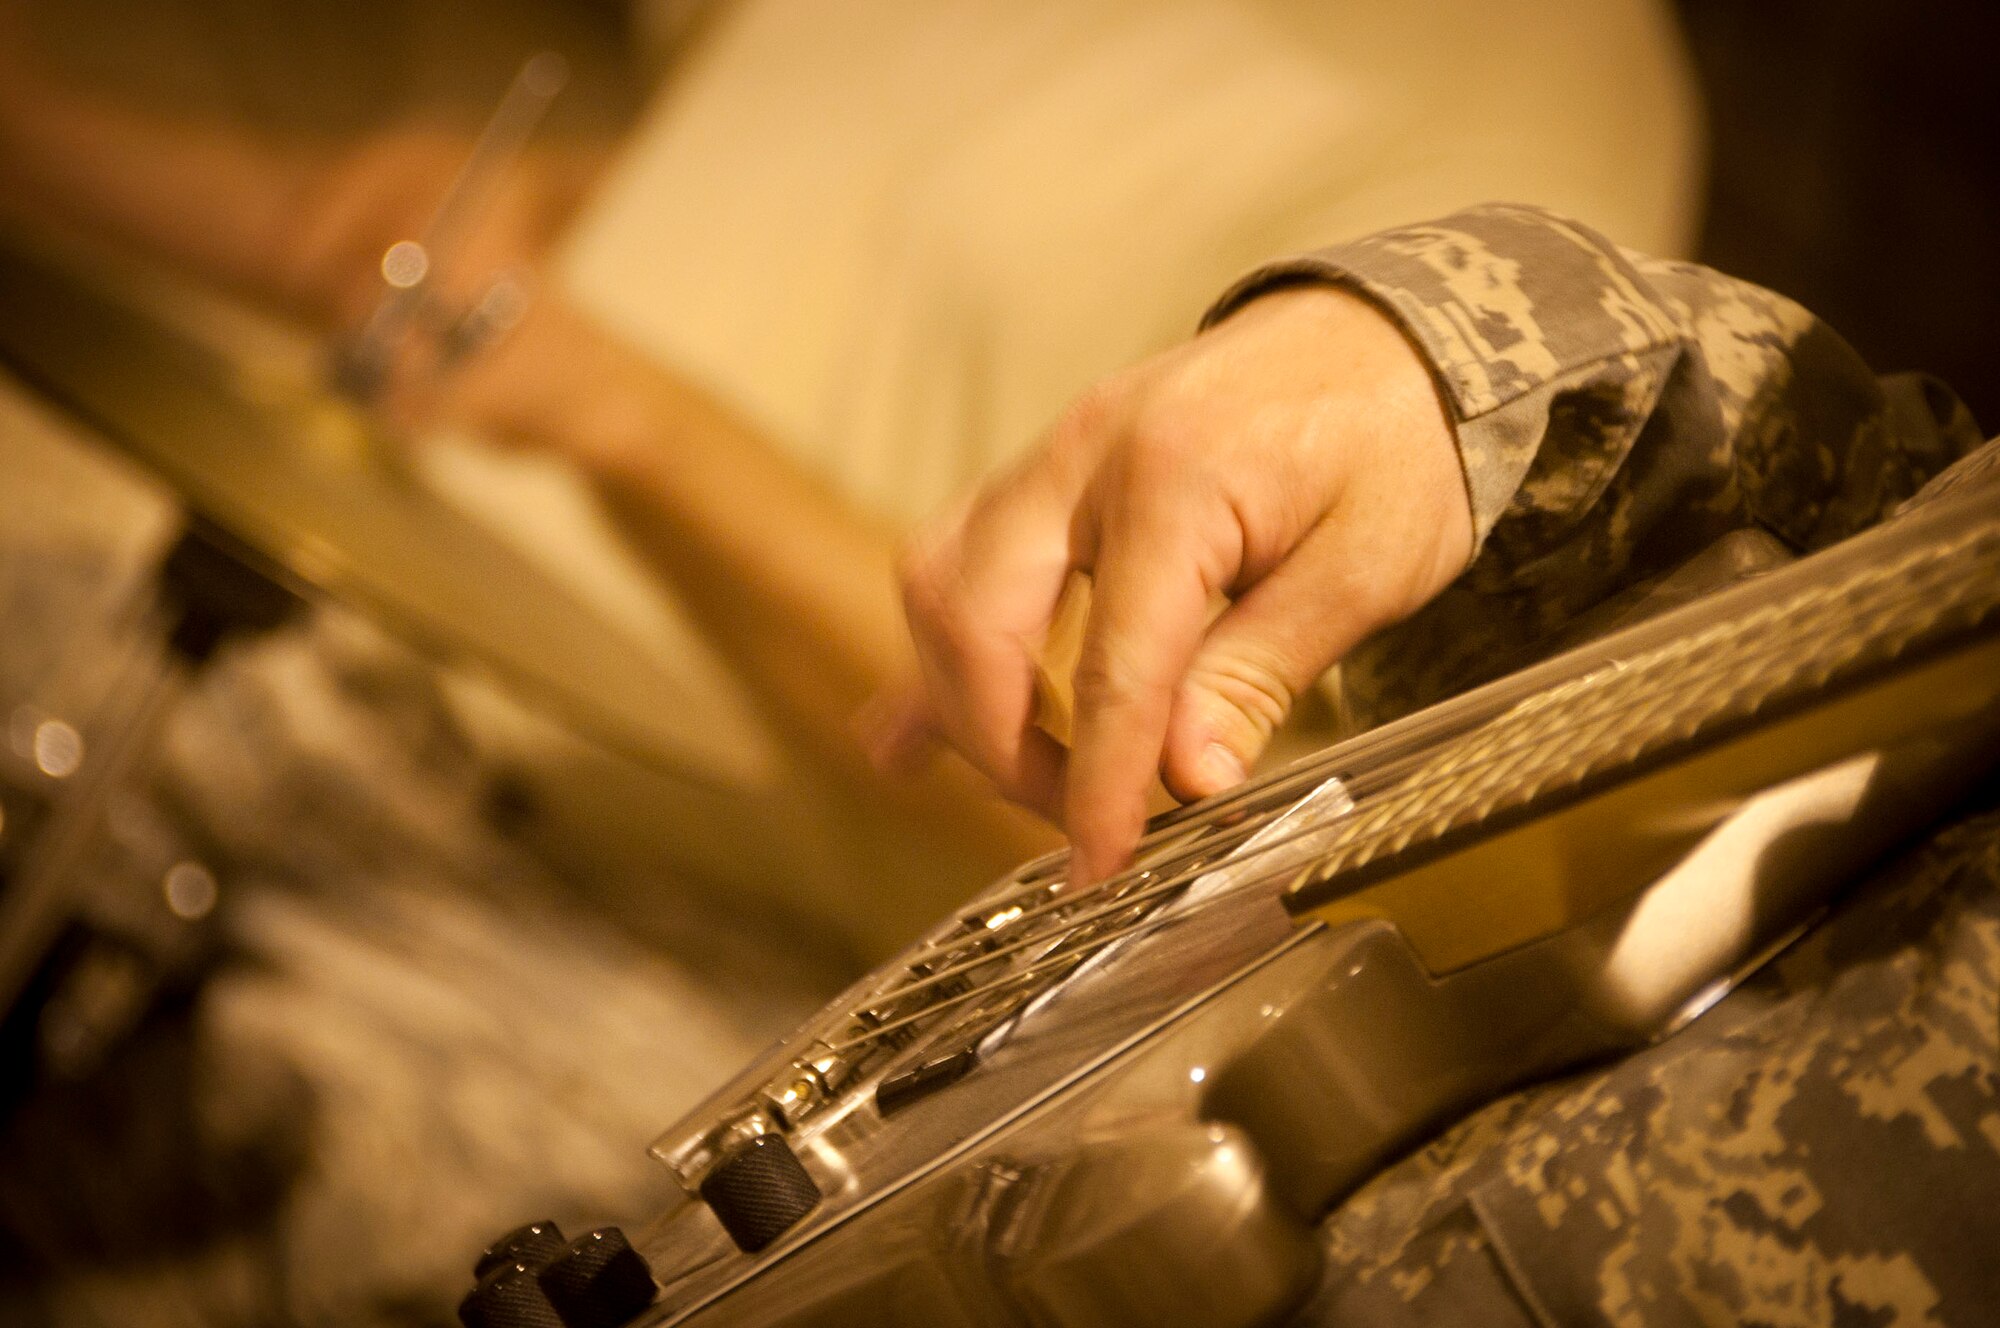 The AFCENT band performs a hit song with participating military members at Shindand Airbase, Afghanistan,Aug. 10, 2011. The band is touring through Afghanistan to different bases to boost morale and entertain troops. (U.S. Air Force photo/Senior Airman Corey Hook)